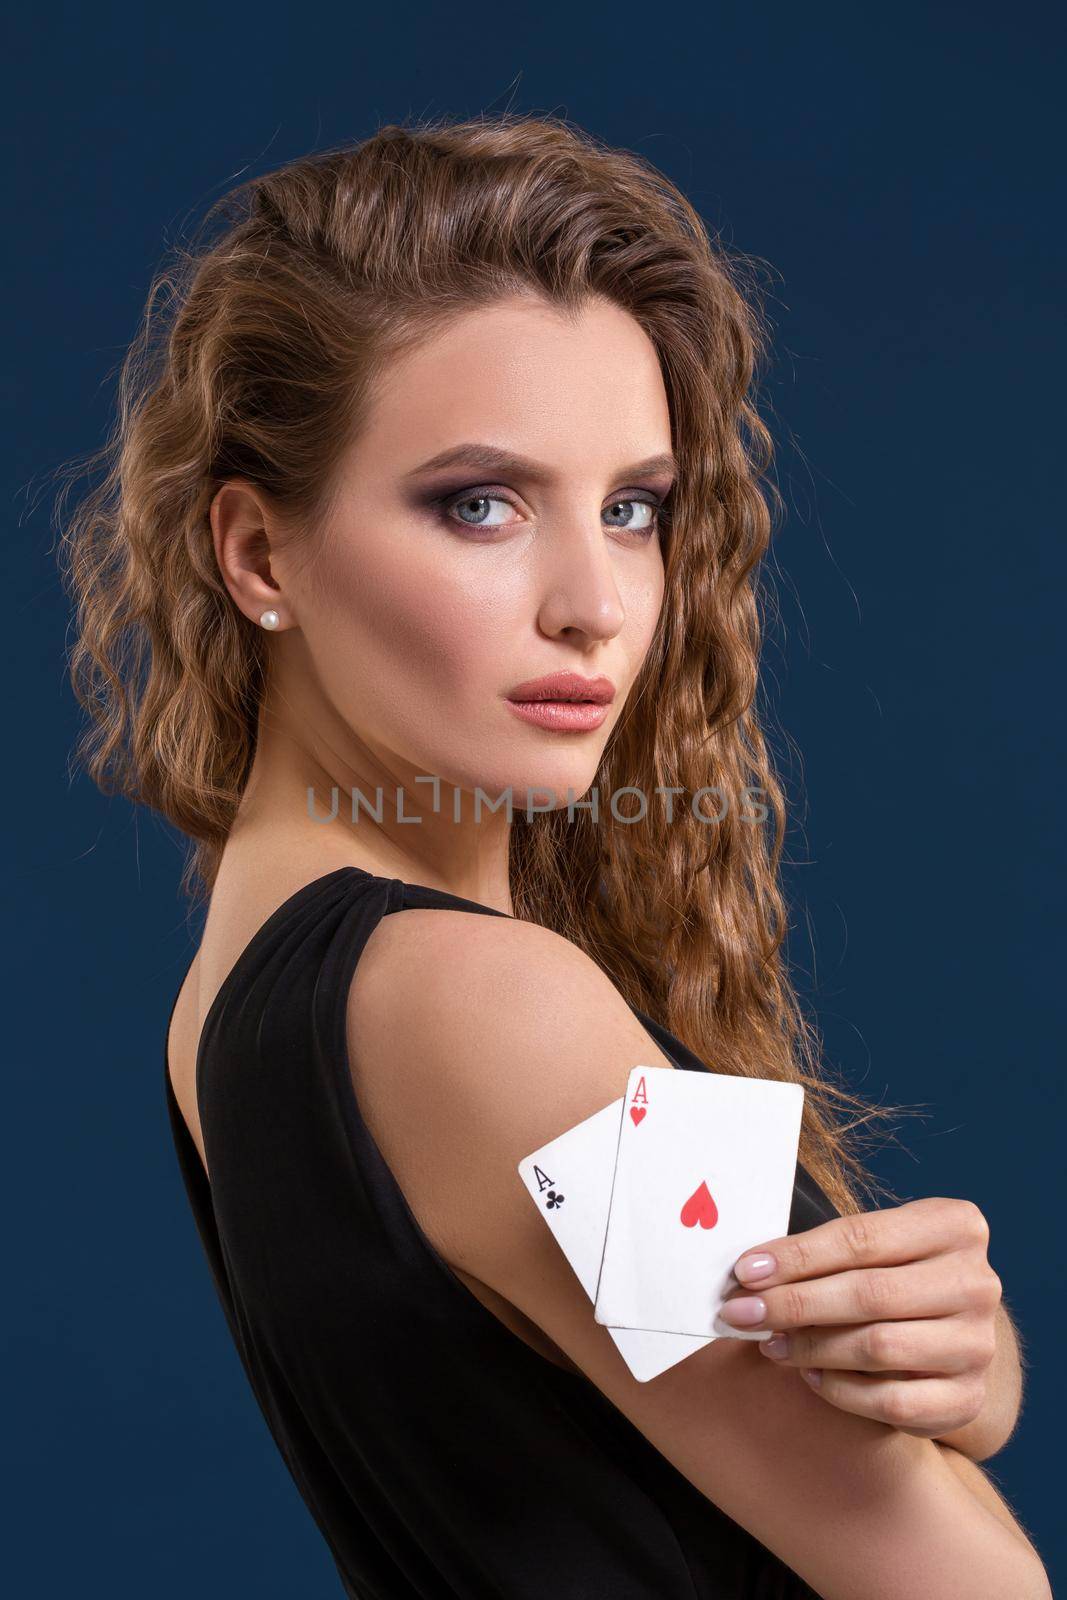 Beautiful woman in black dress holding two aces as a sign for poker game on dark blue background, gambling and casino